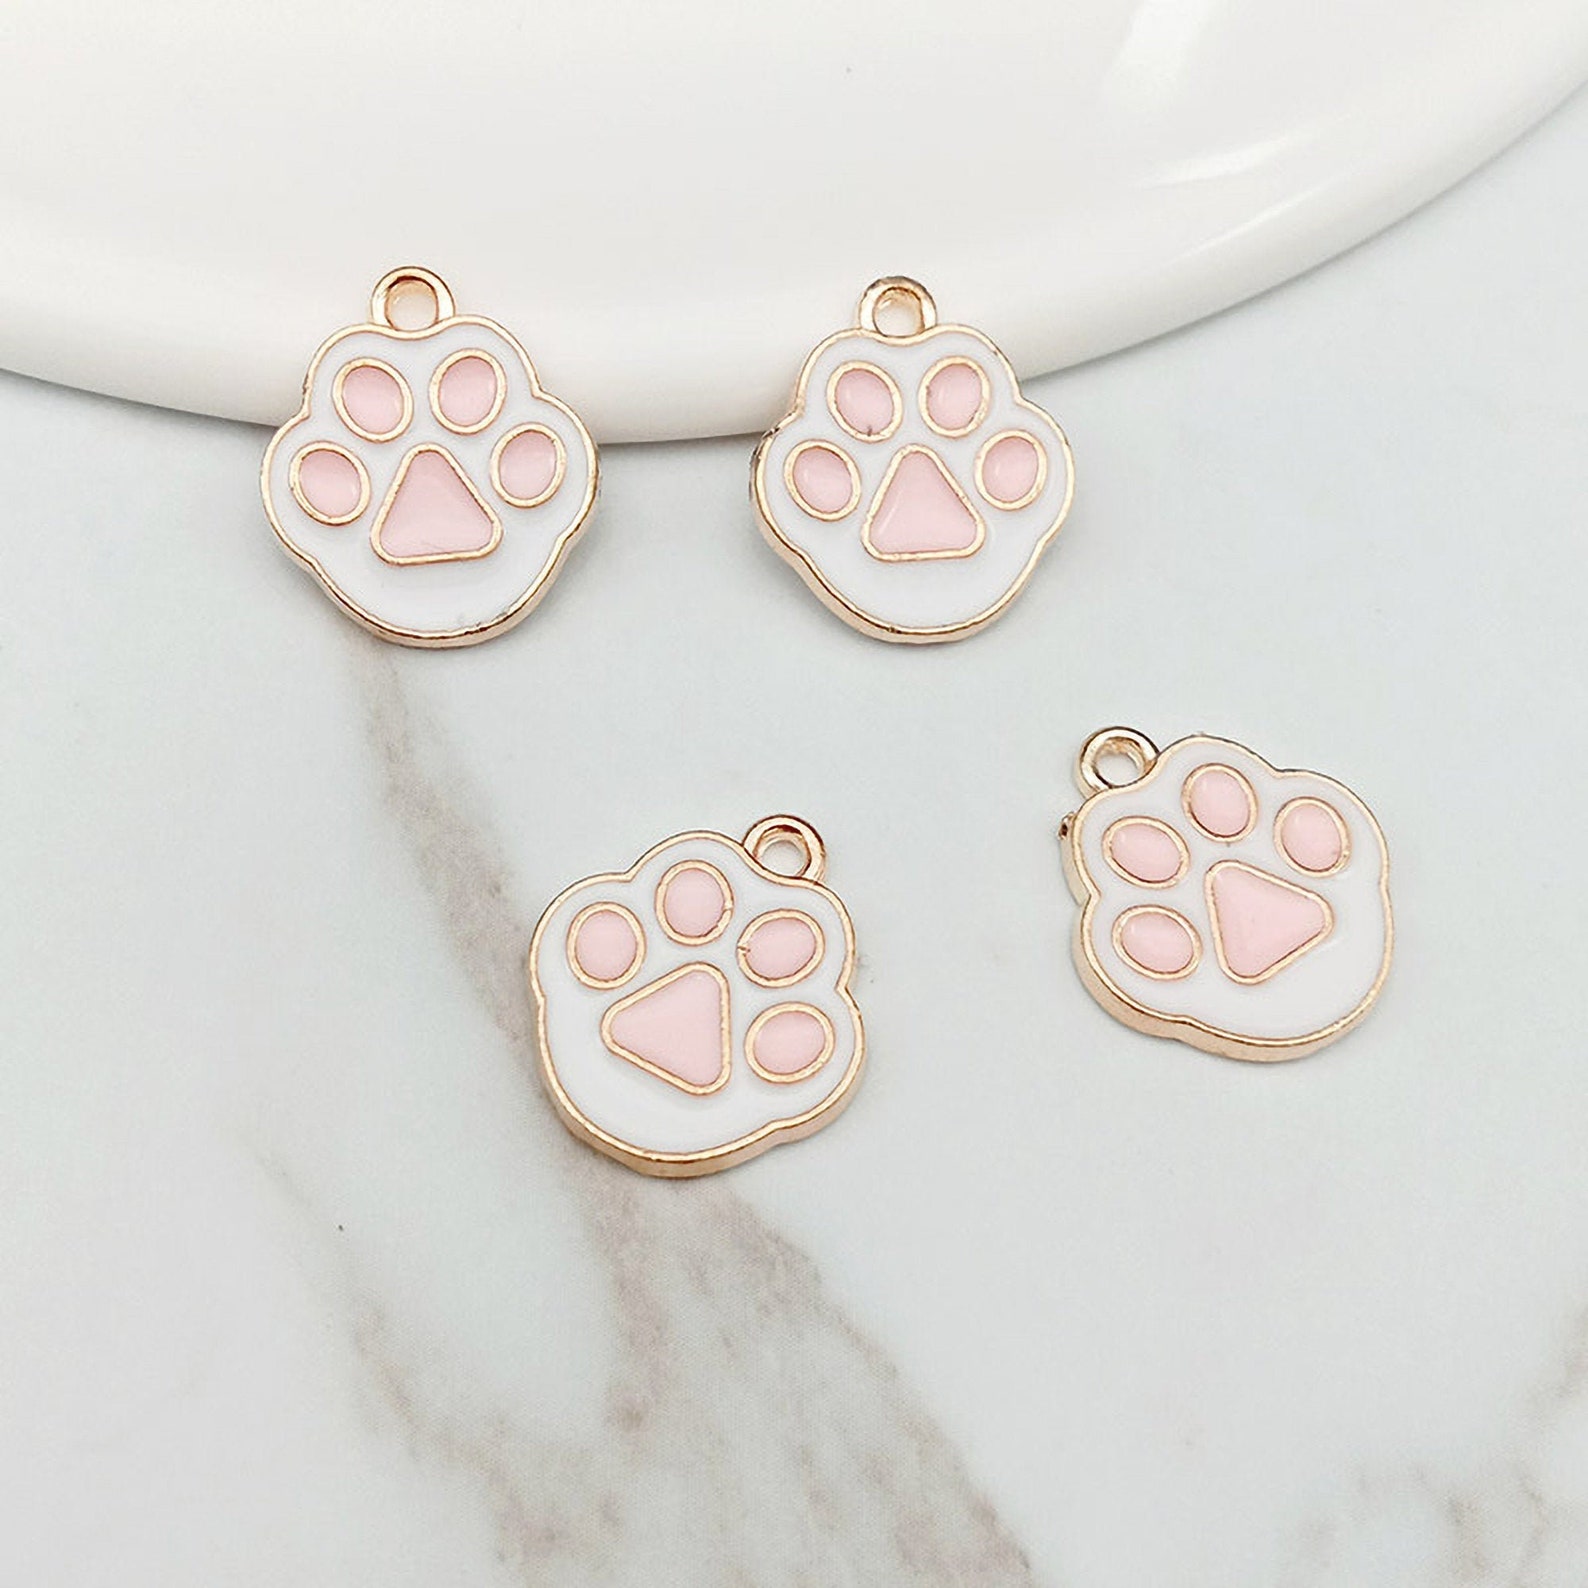 10pcs Dog Jewelry Charms Cute Earring Charms Animal Charm | Etsy